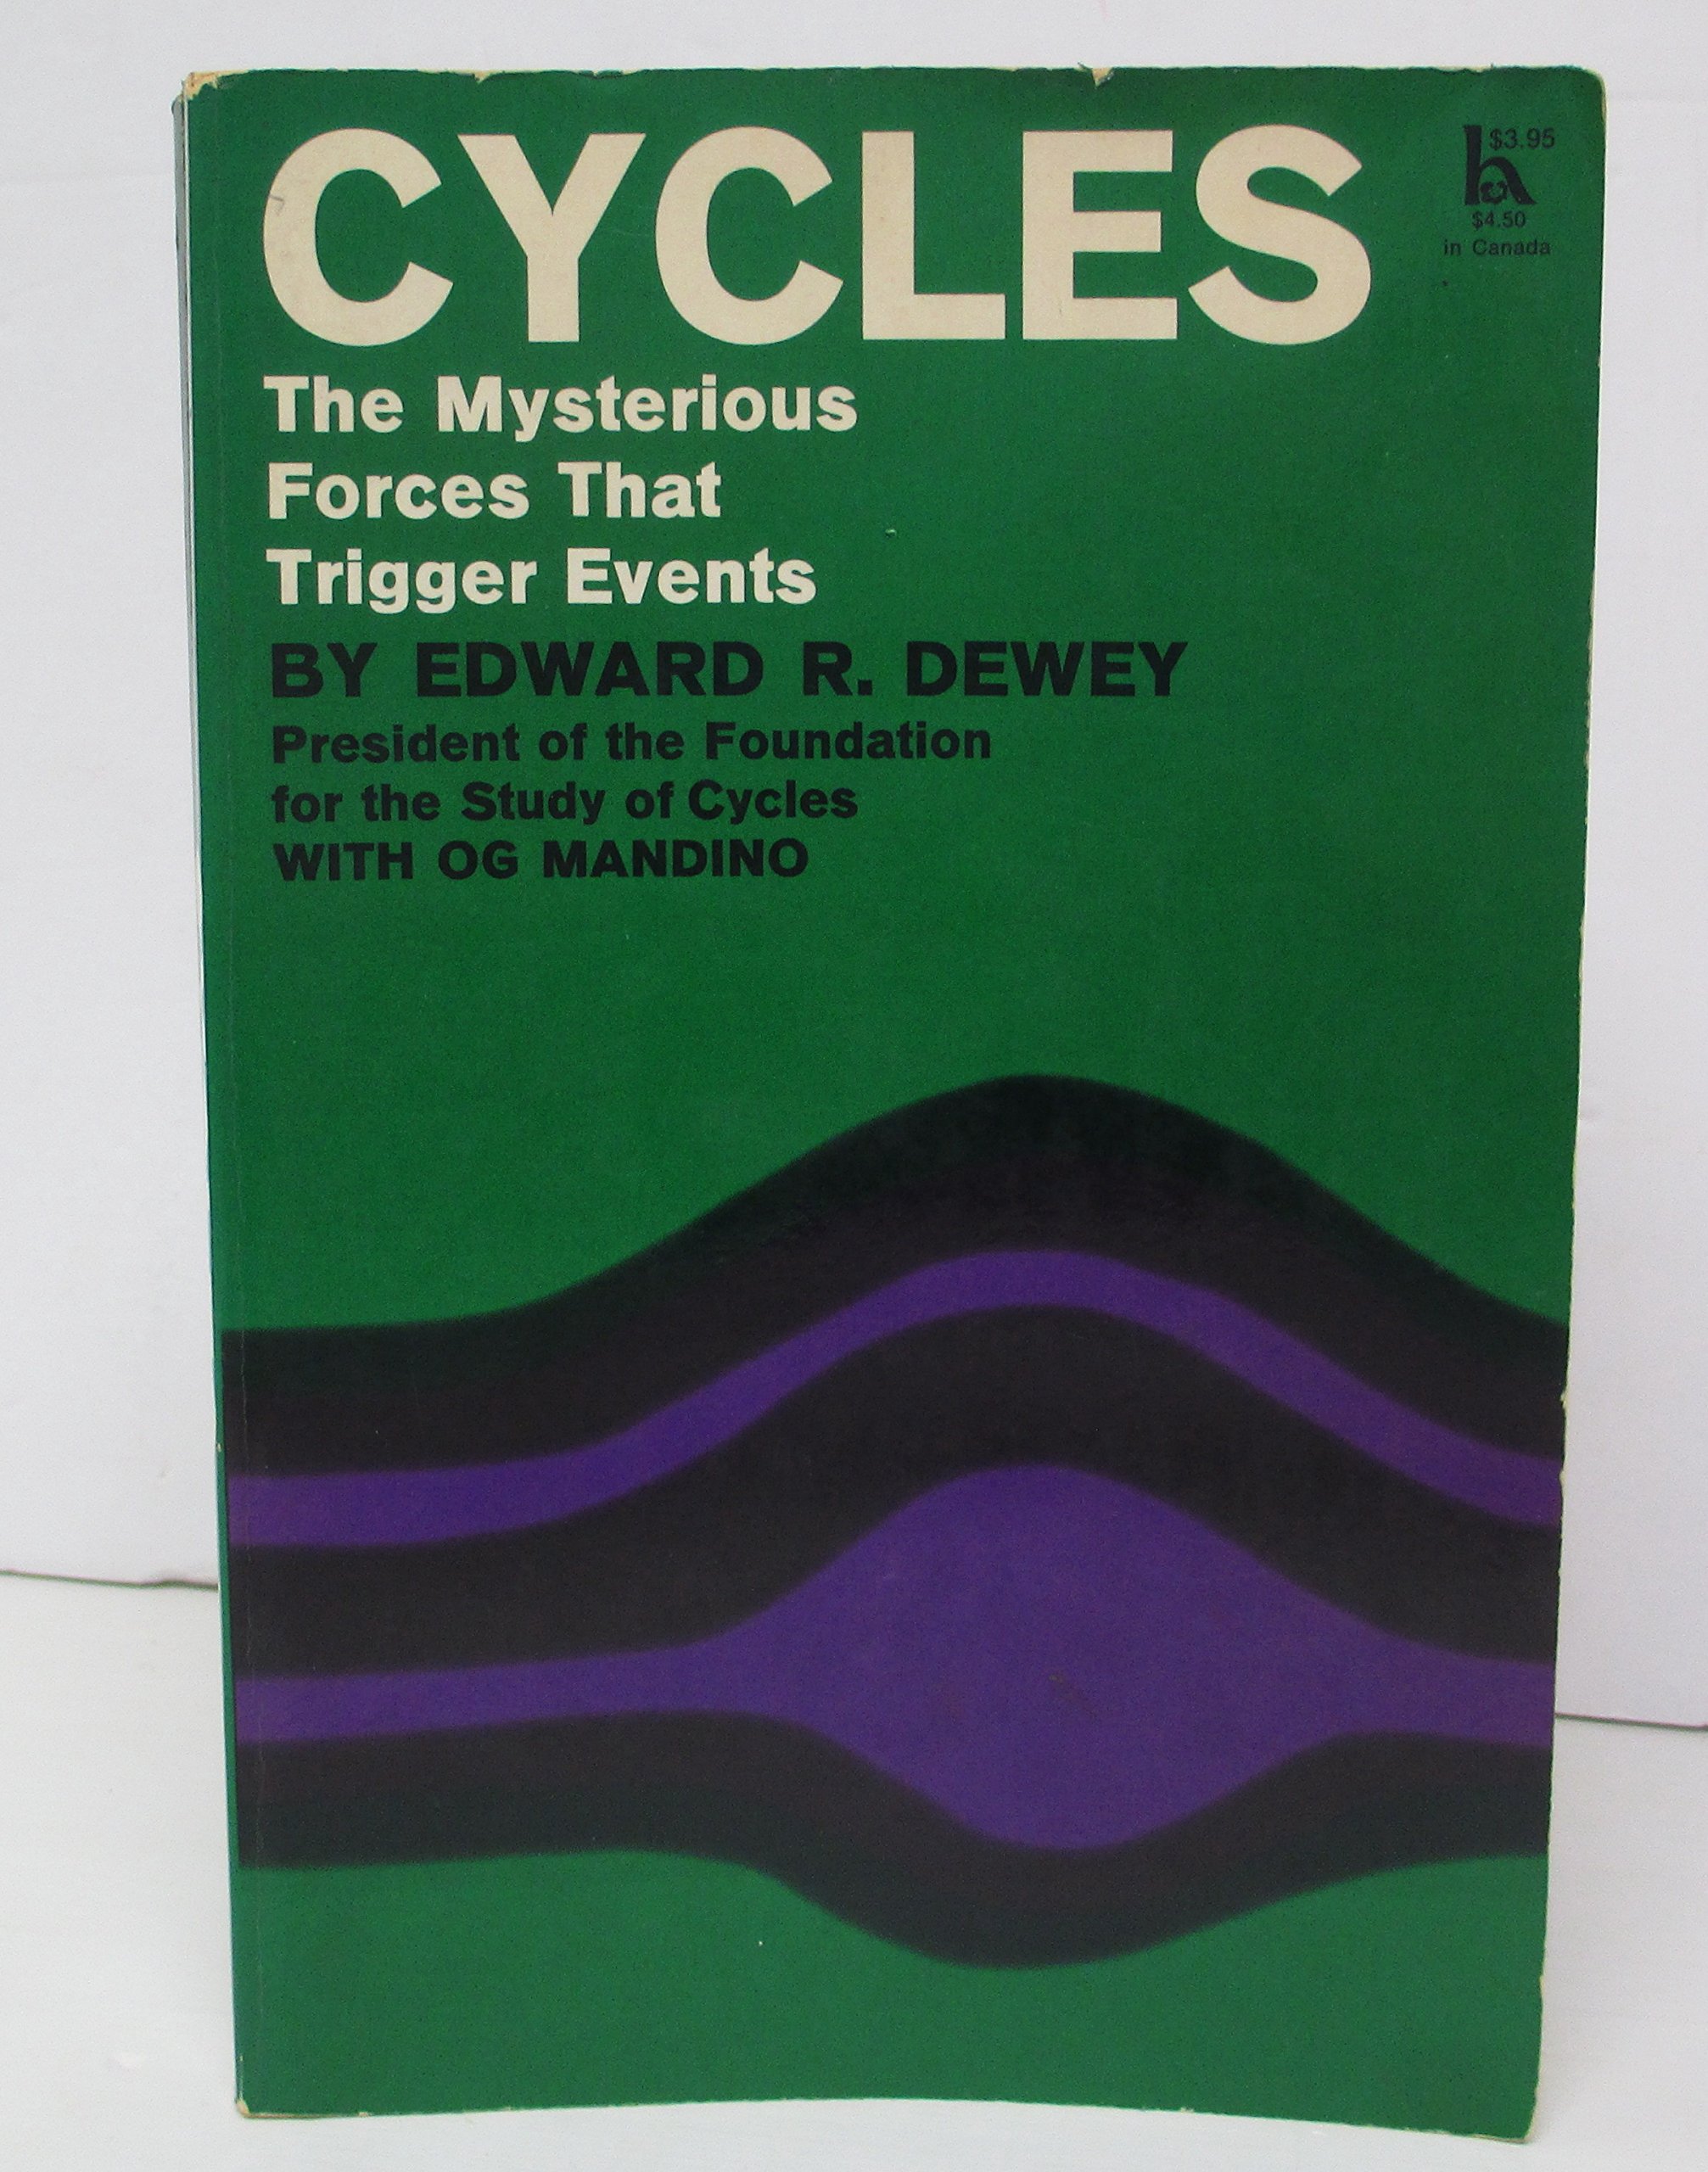 Cycles The Mysterious Forces That Trigger Events Pdf